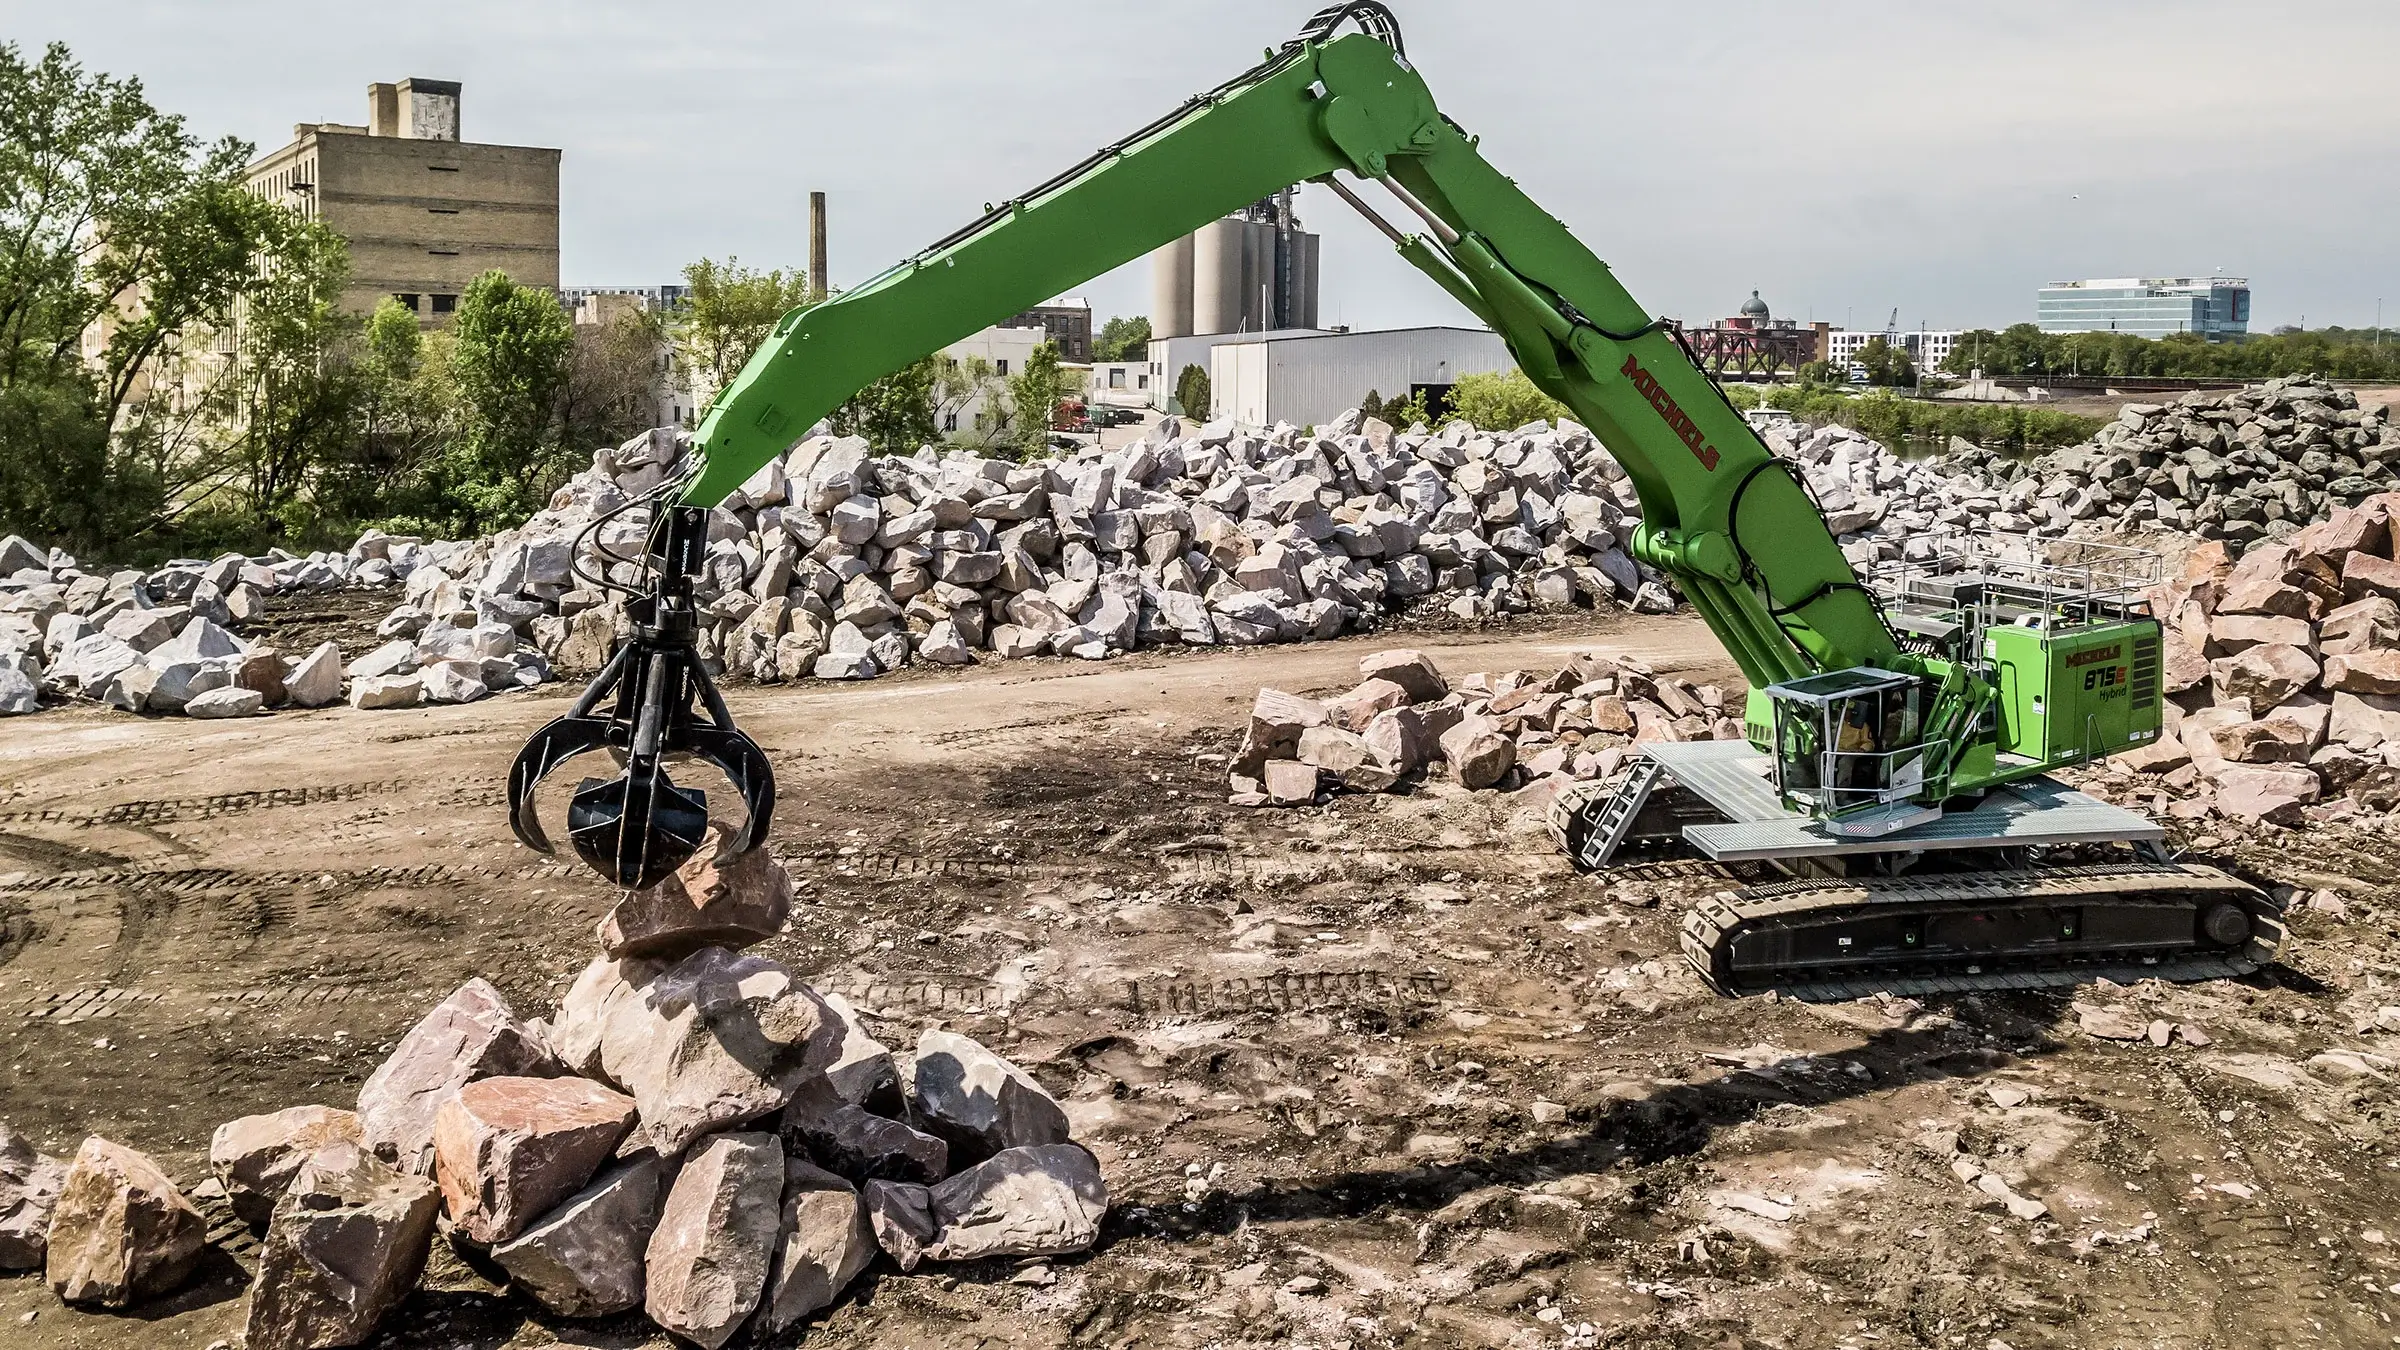 Michels uses a hybrid crane to move large boulders